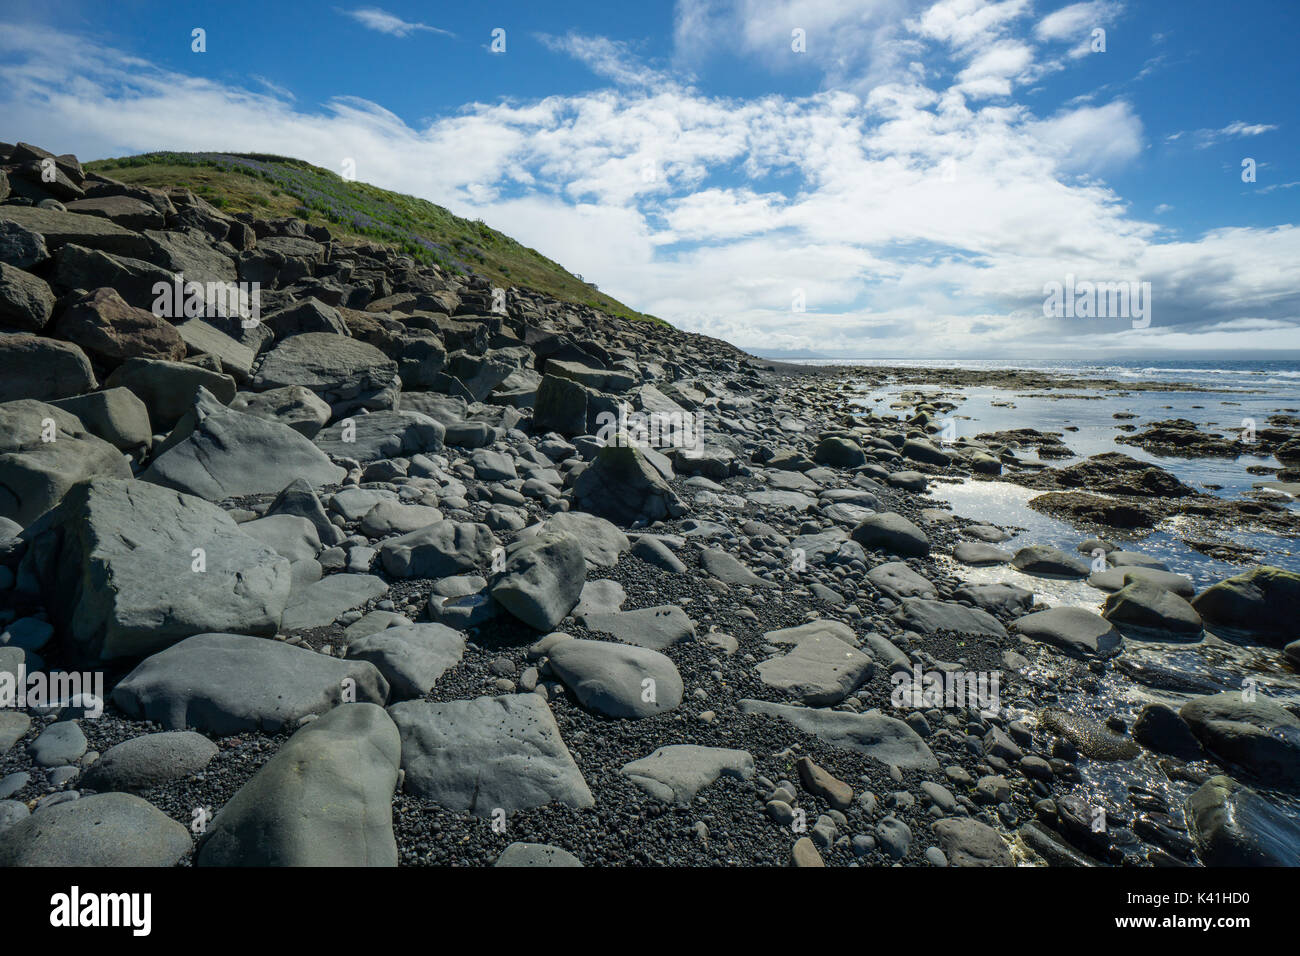 Iceland - Green hill behind stony shore and reflecting water of blonduos coastline Stock Photo